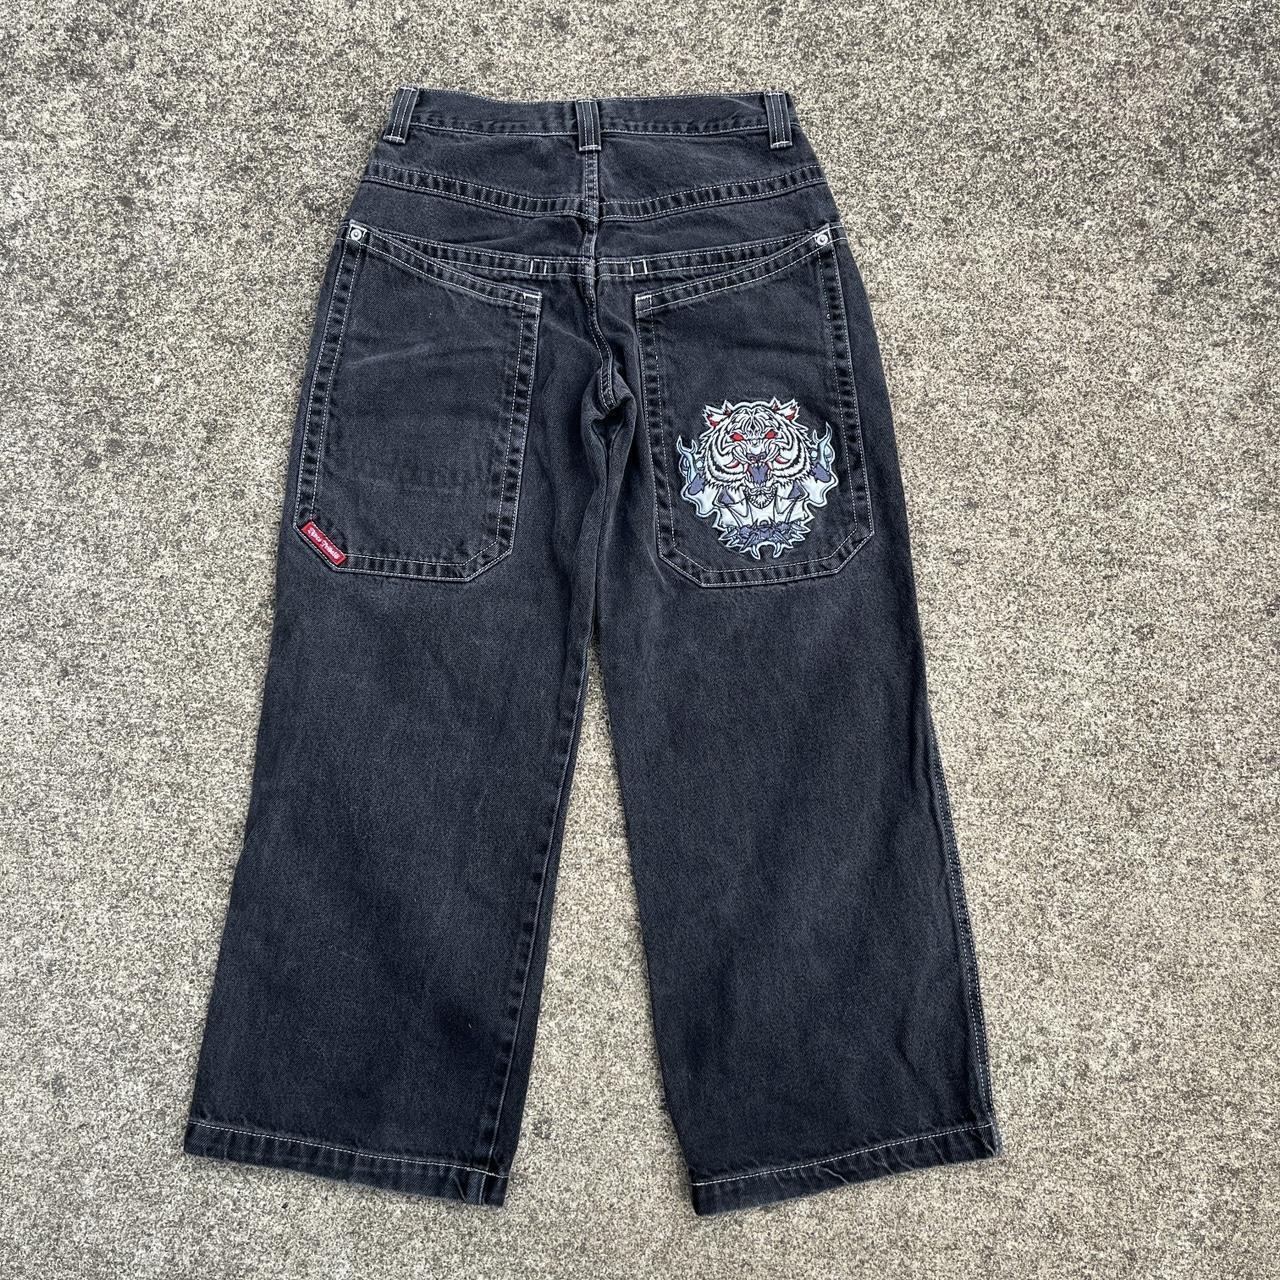 Vintage JNCO Jeans Tribals Features flaming white... - Depop